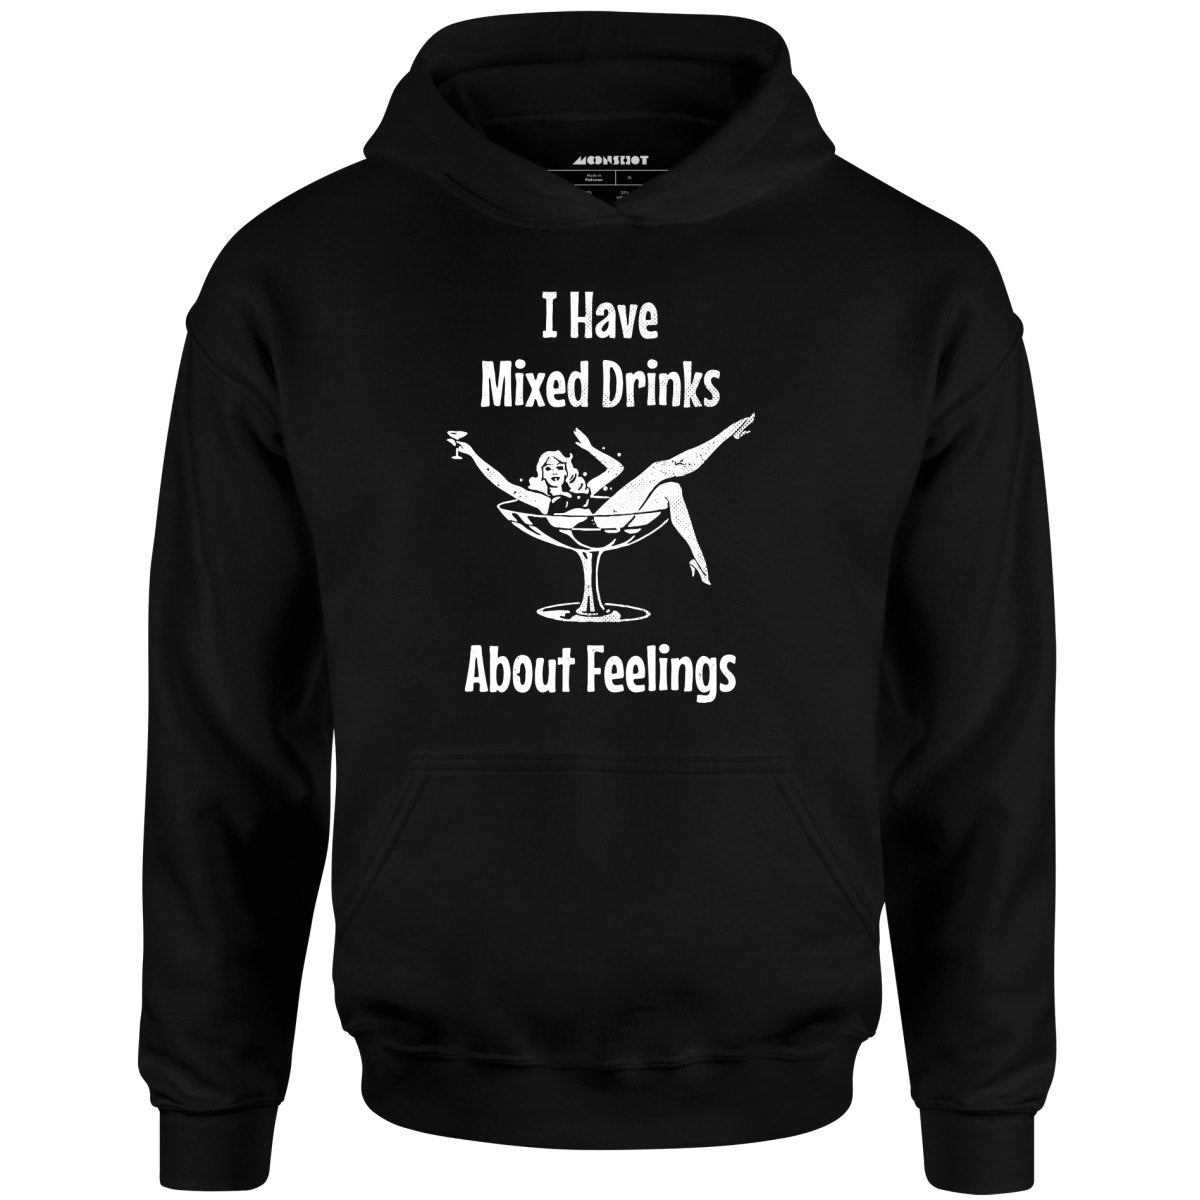 I Have Mixed Drinks About Feelings - Unisex Hoodie